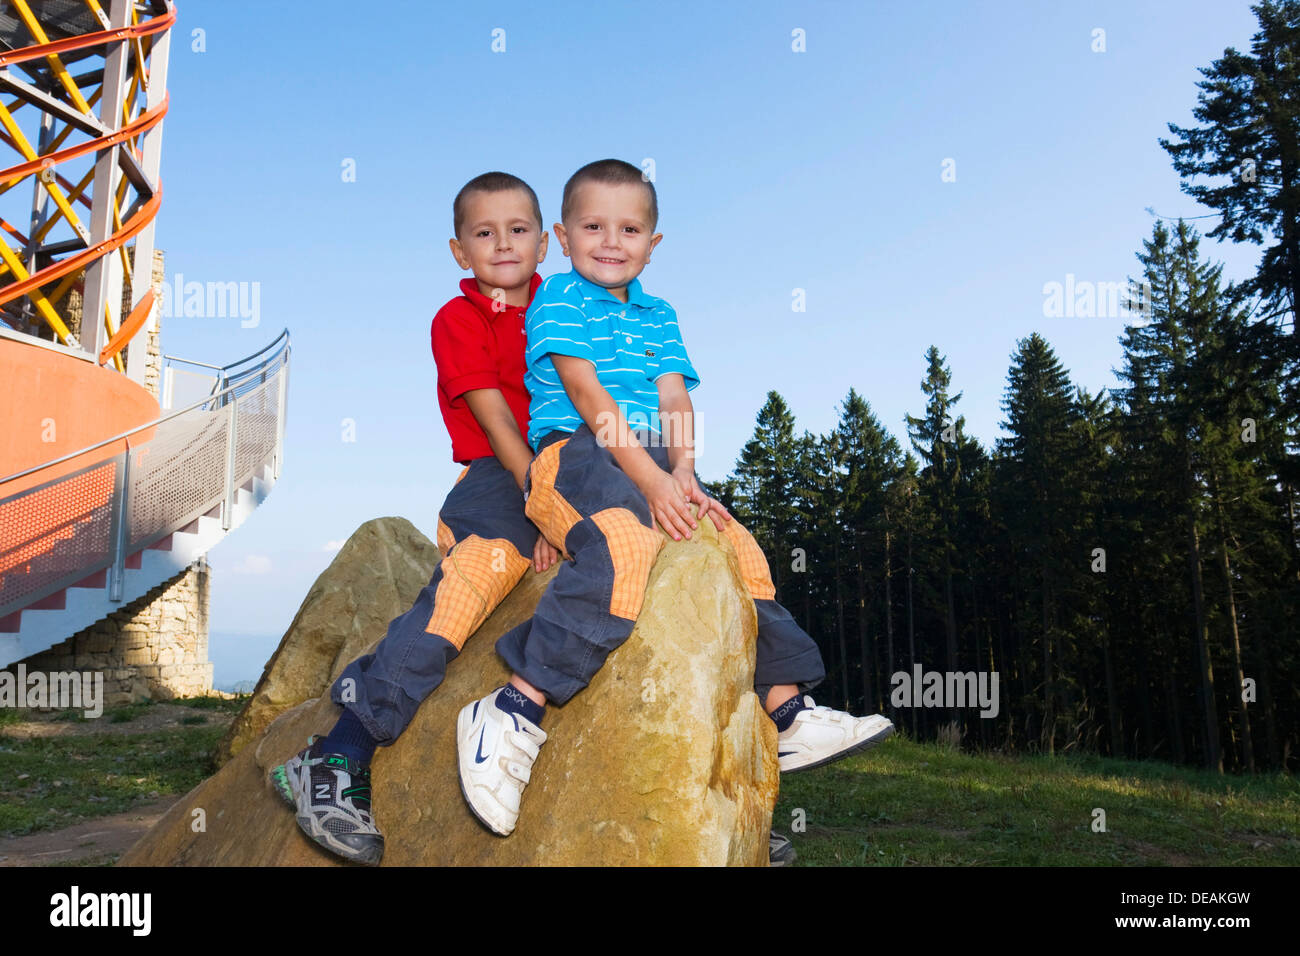 Boys, 6 and 4 years, sitting on a rock Stock Photo